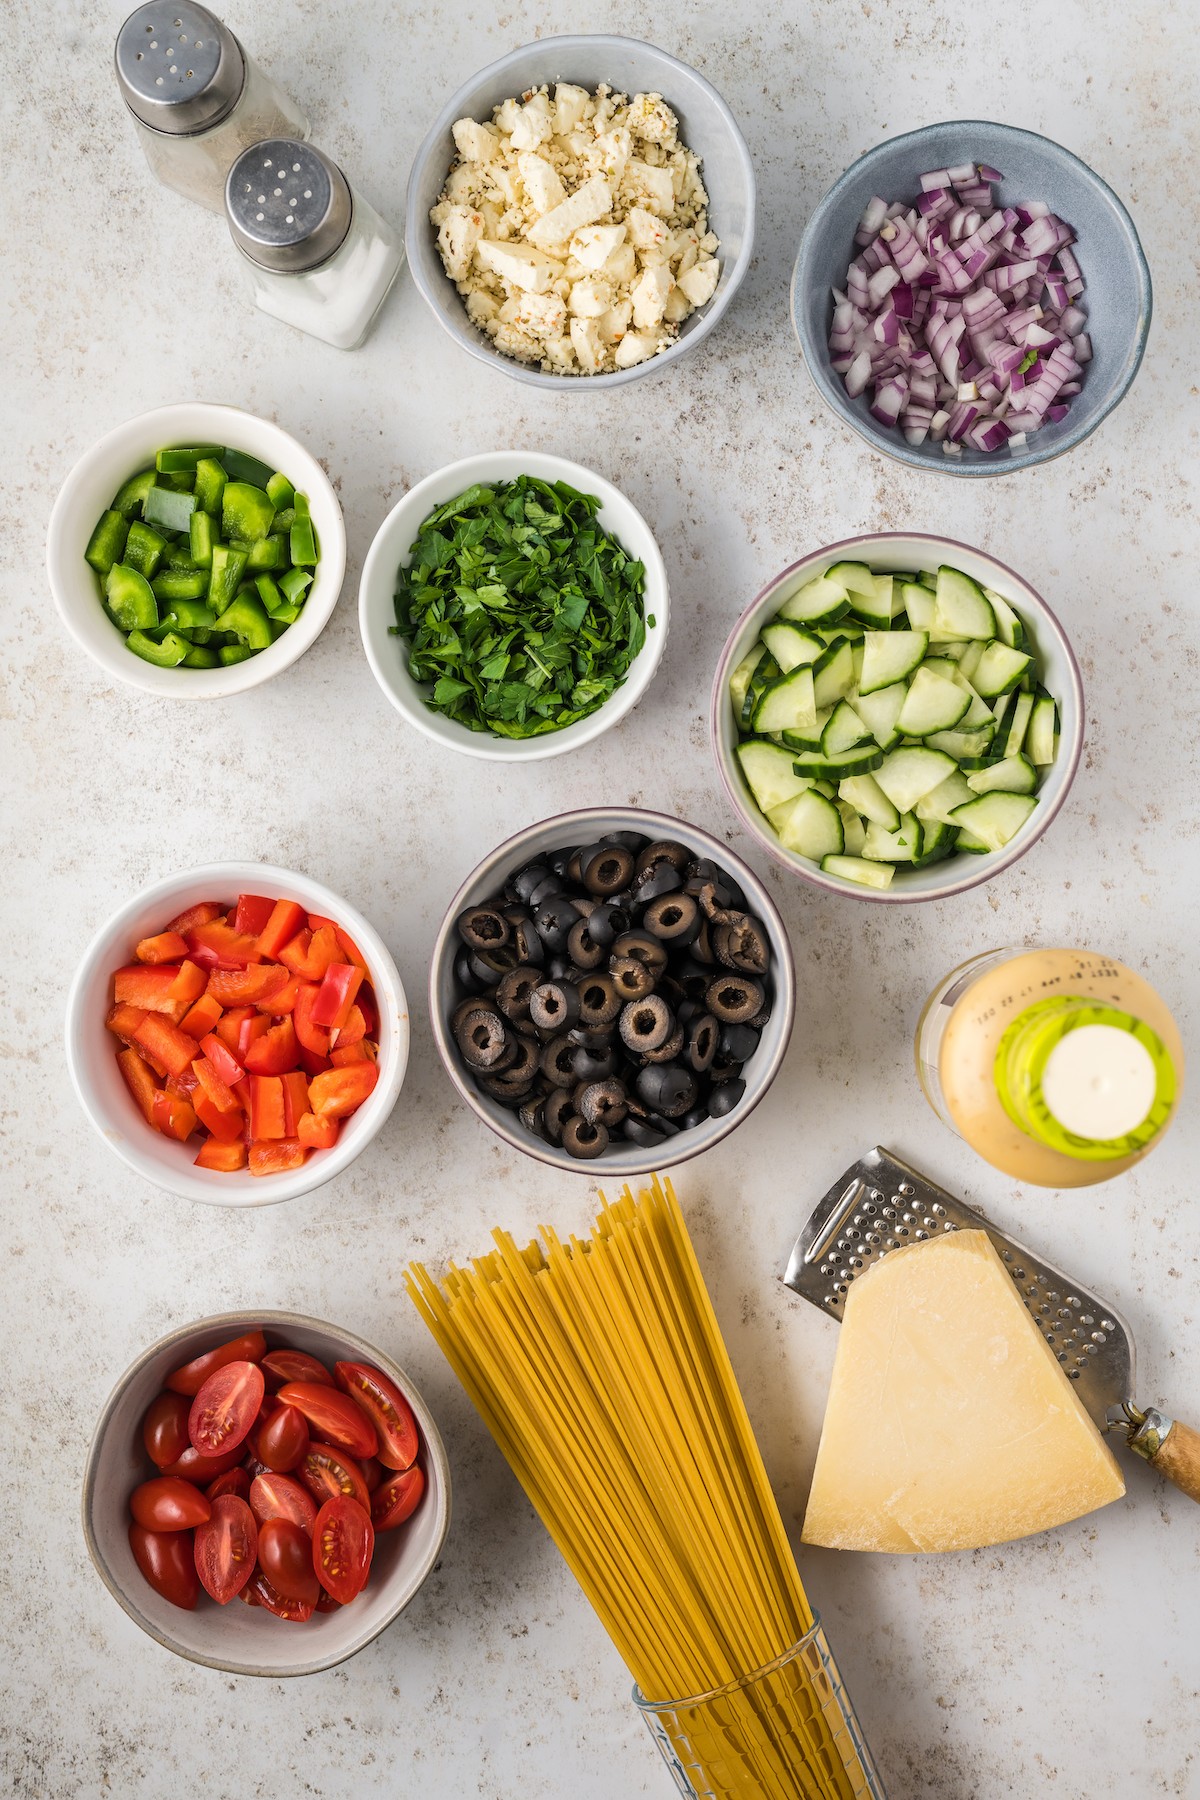 Ingredients for spaghetti salad arranged on a work surface.